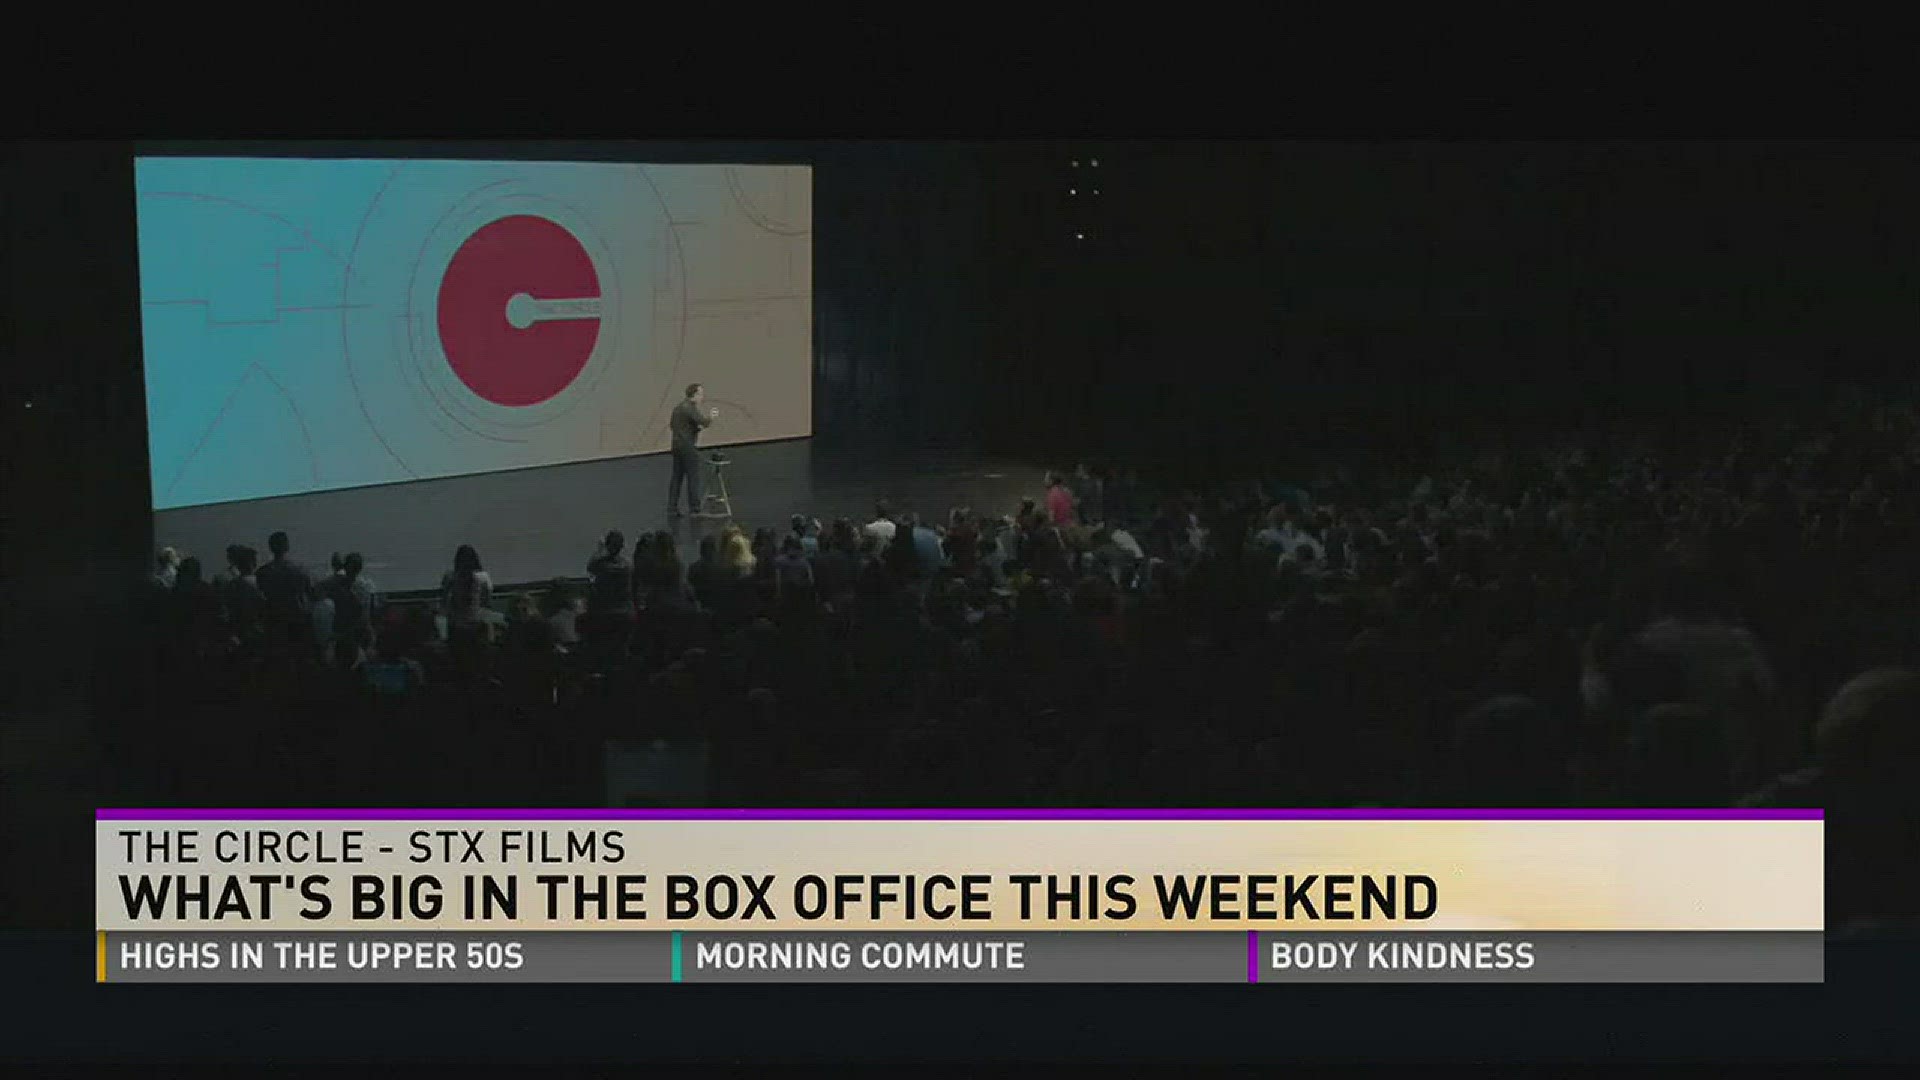 What's Big in the Box Office this Weekend